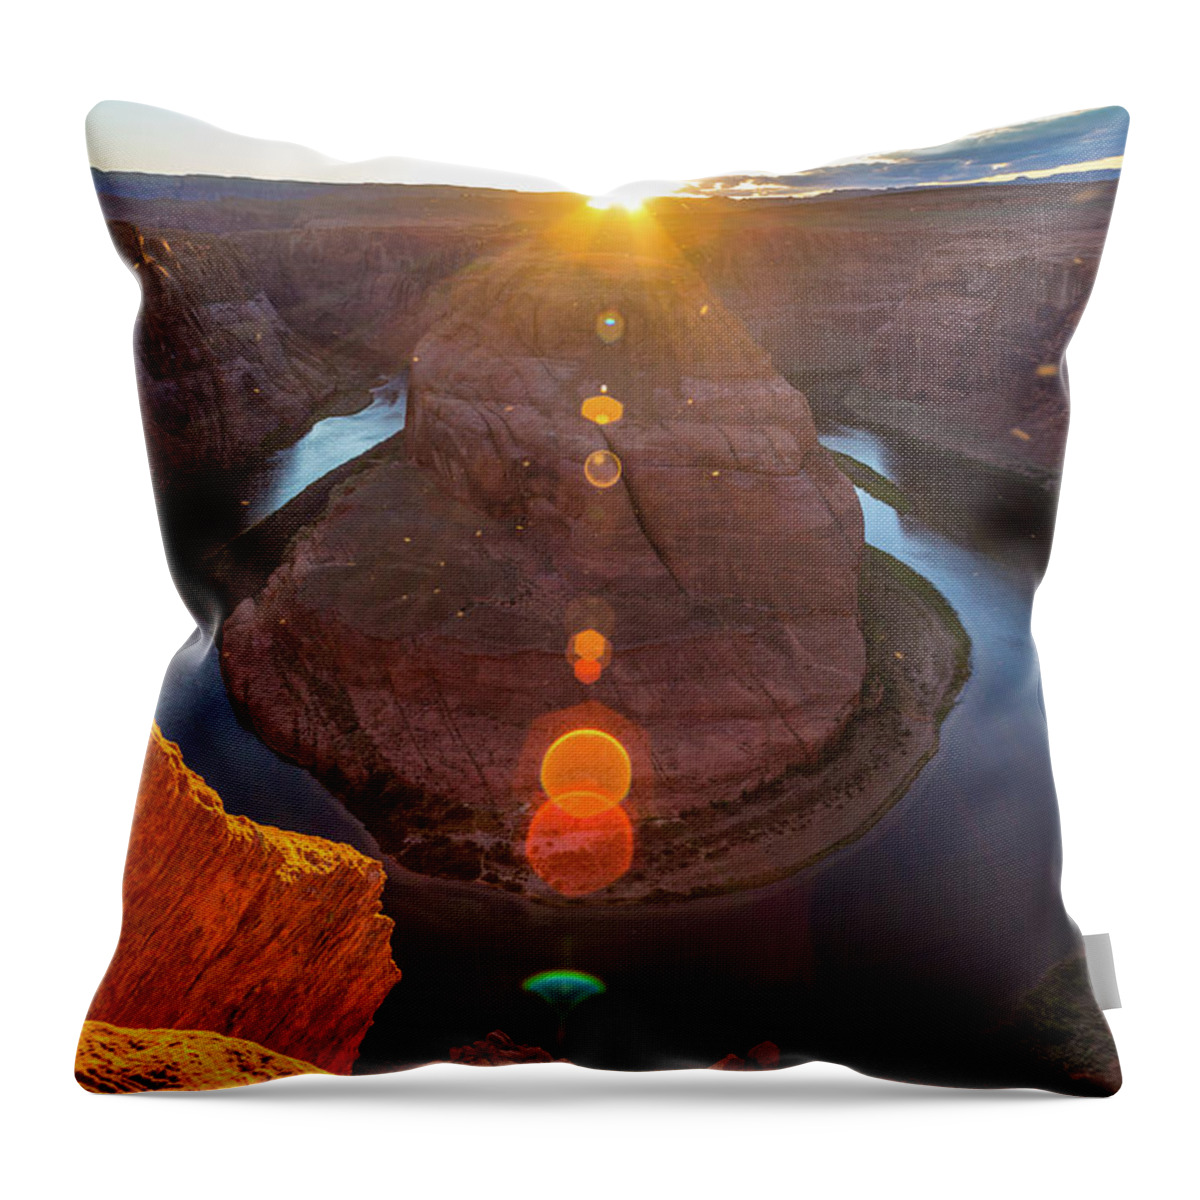 Scenics Throw Pillow featuring the photograph Colorado River, Horseshoe Bend In by Deimagine